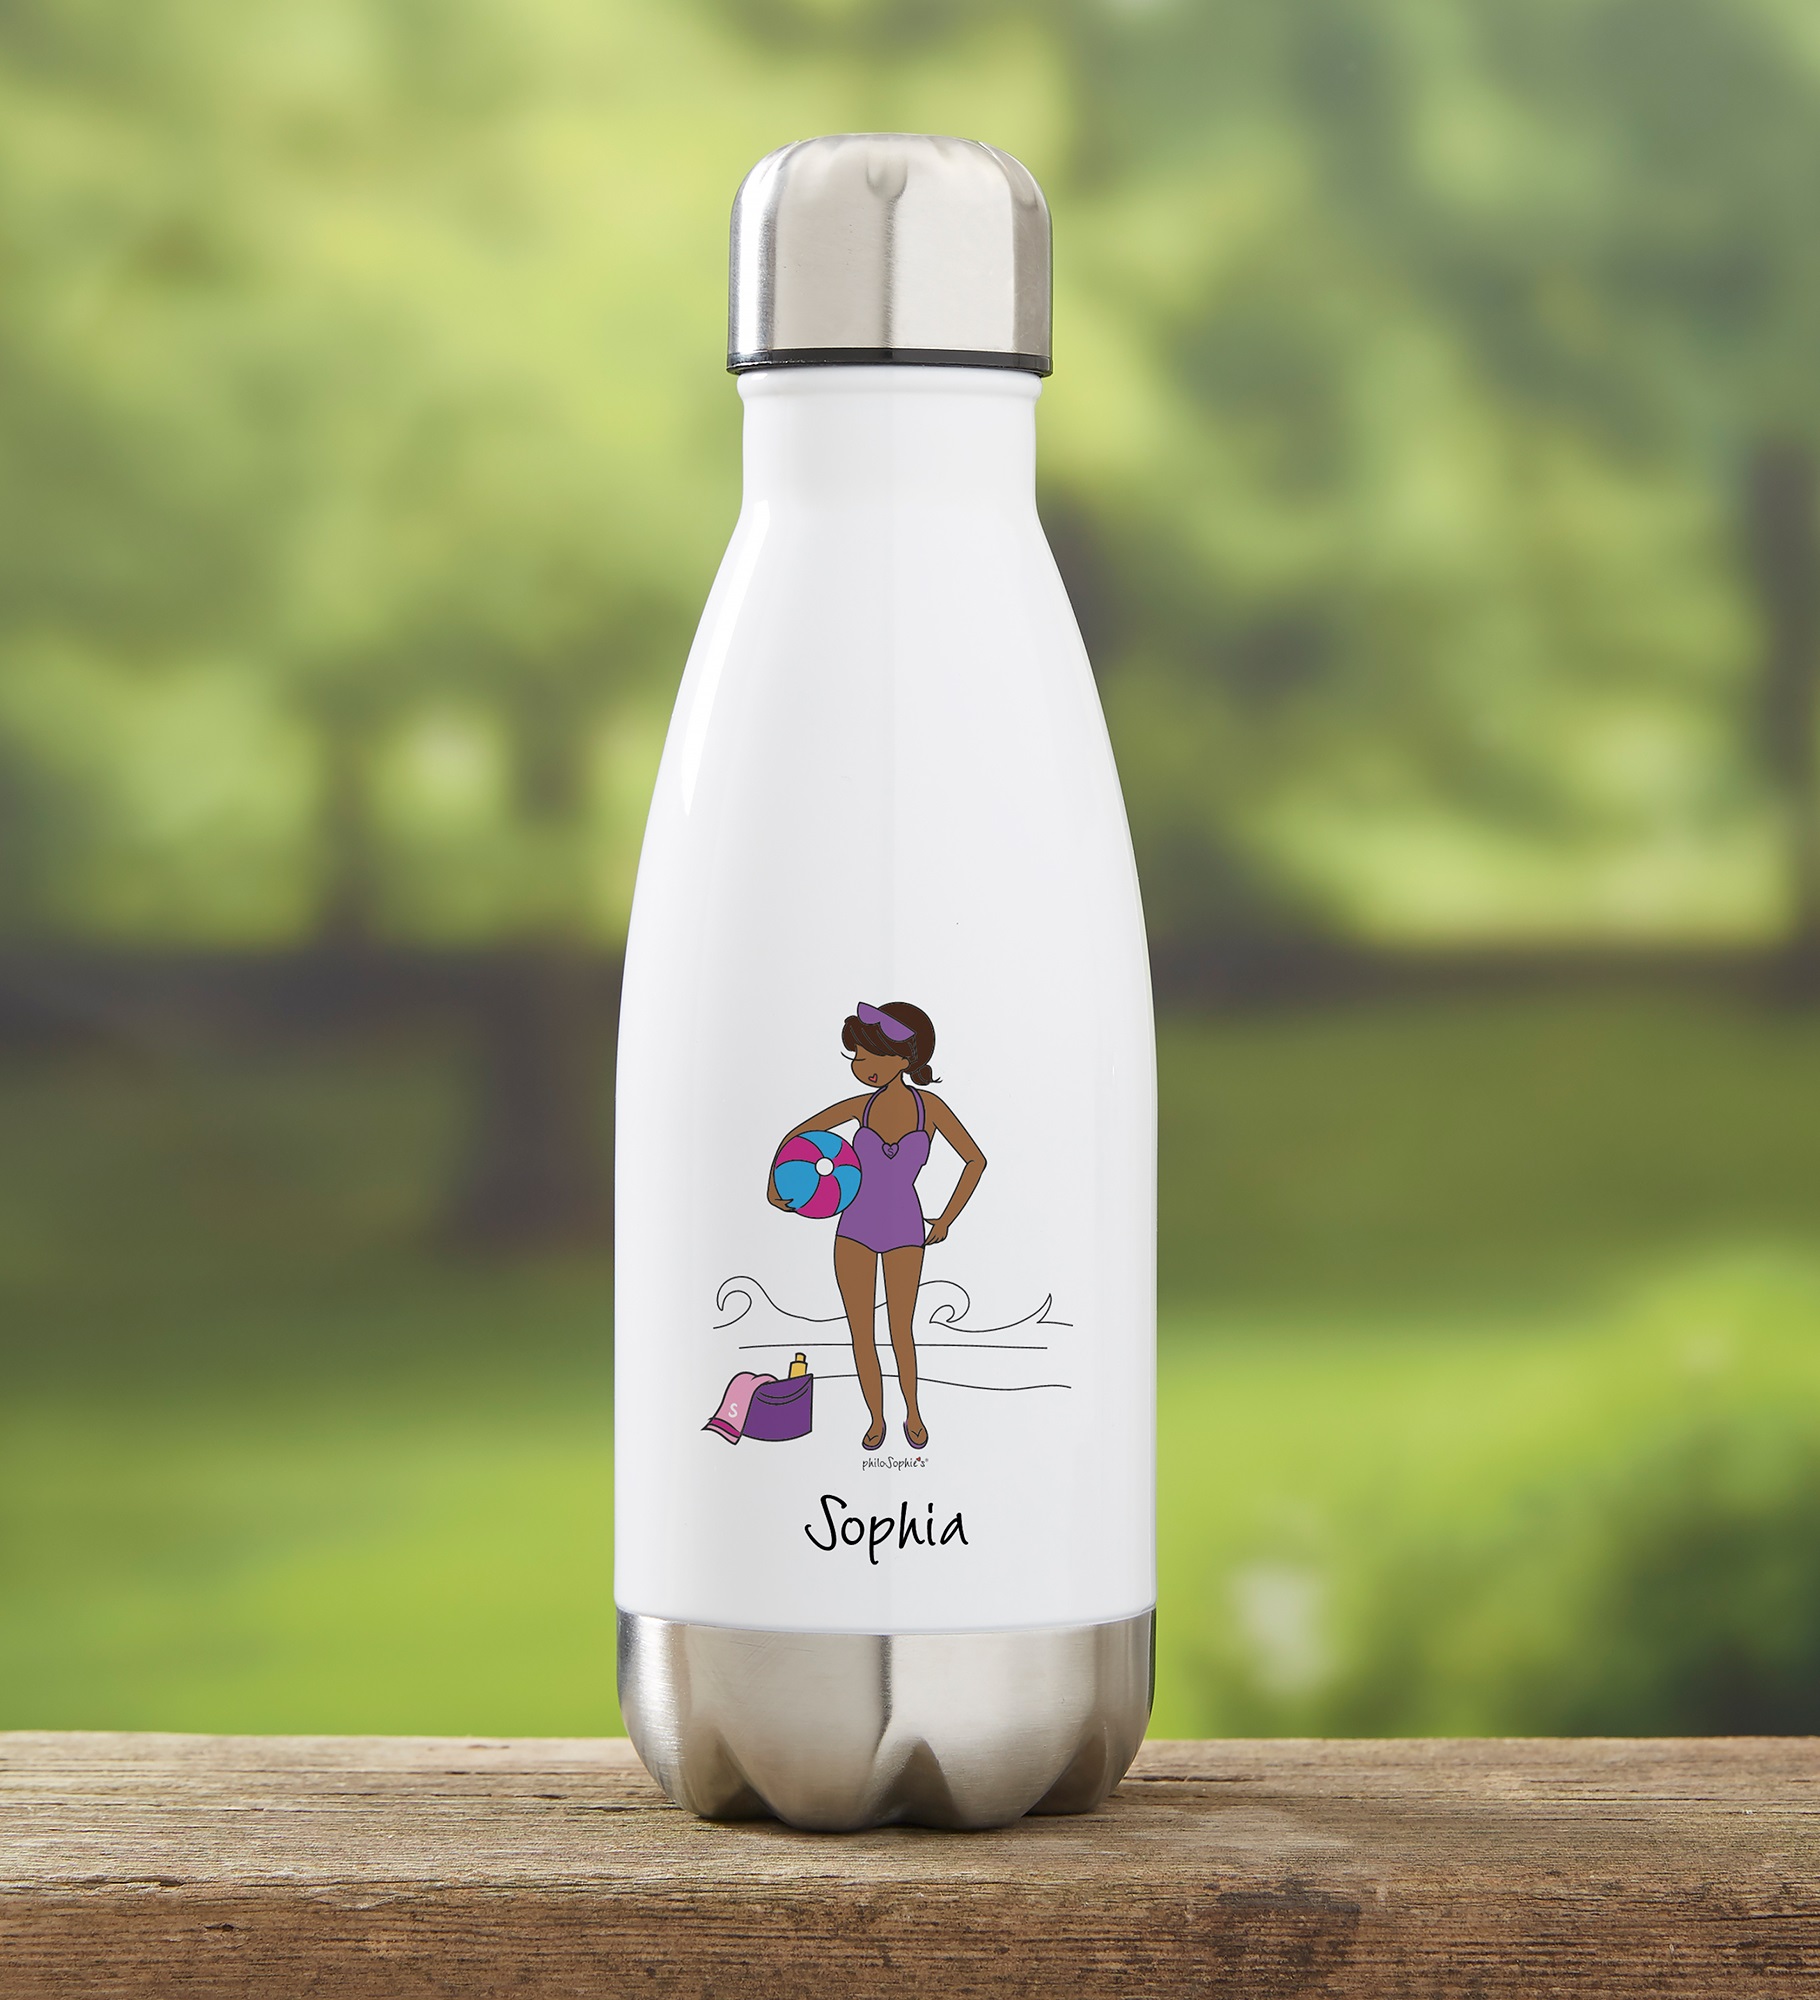 philoSophie's® Summer Personalized Insulated Water Bottle